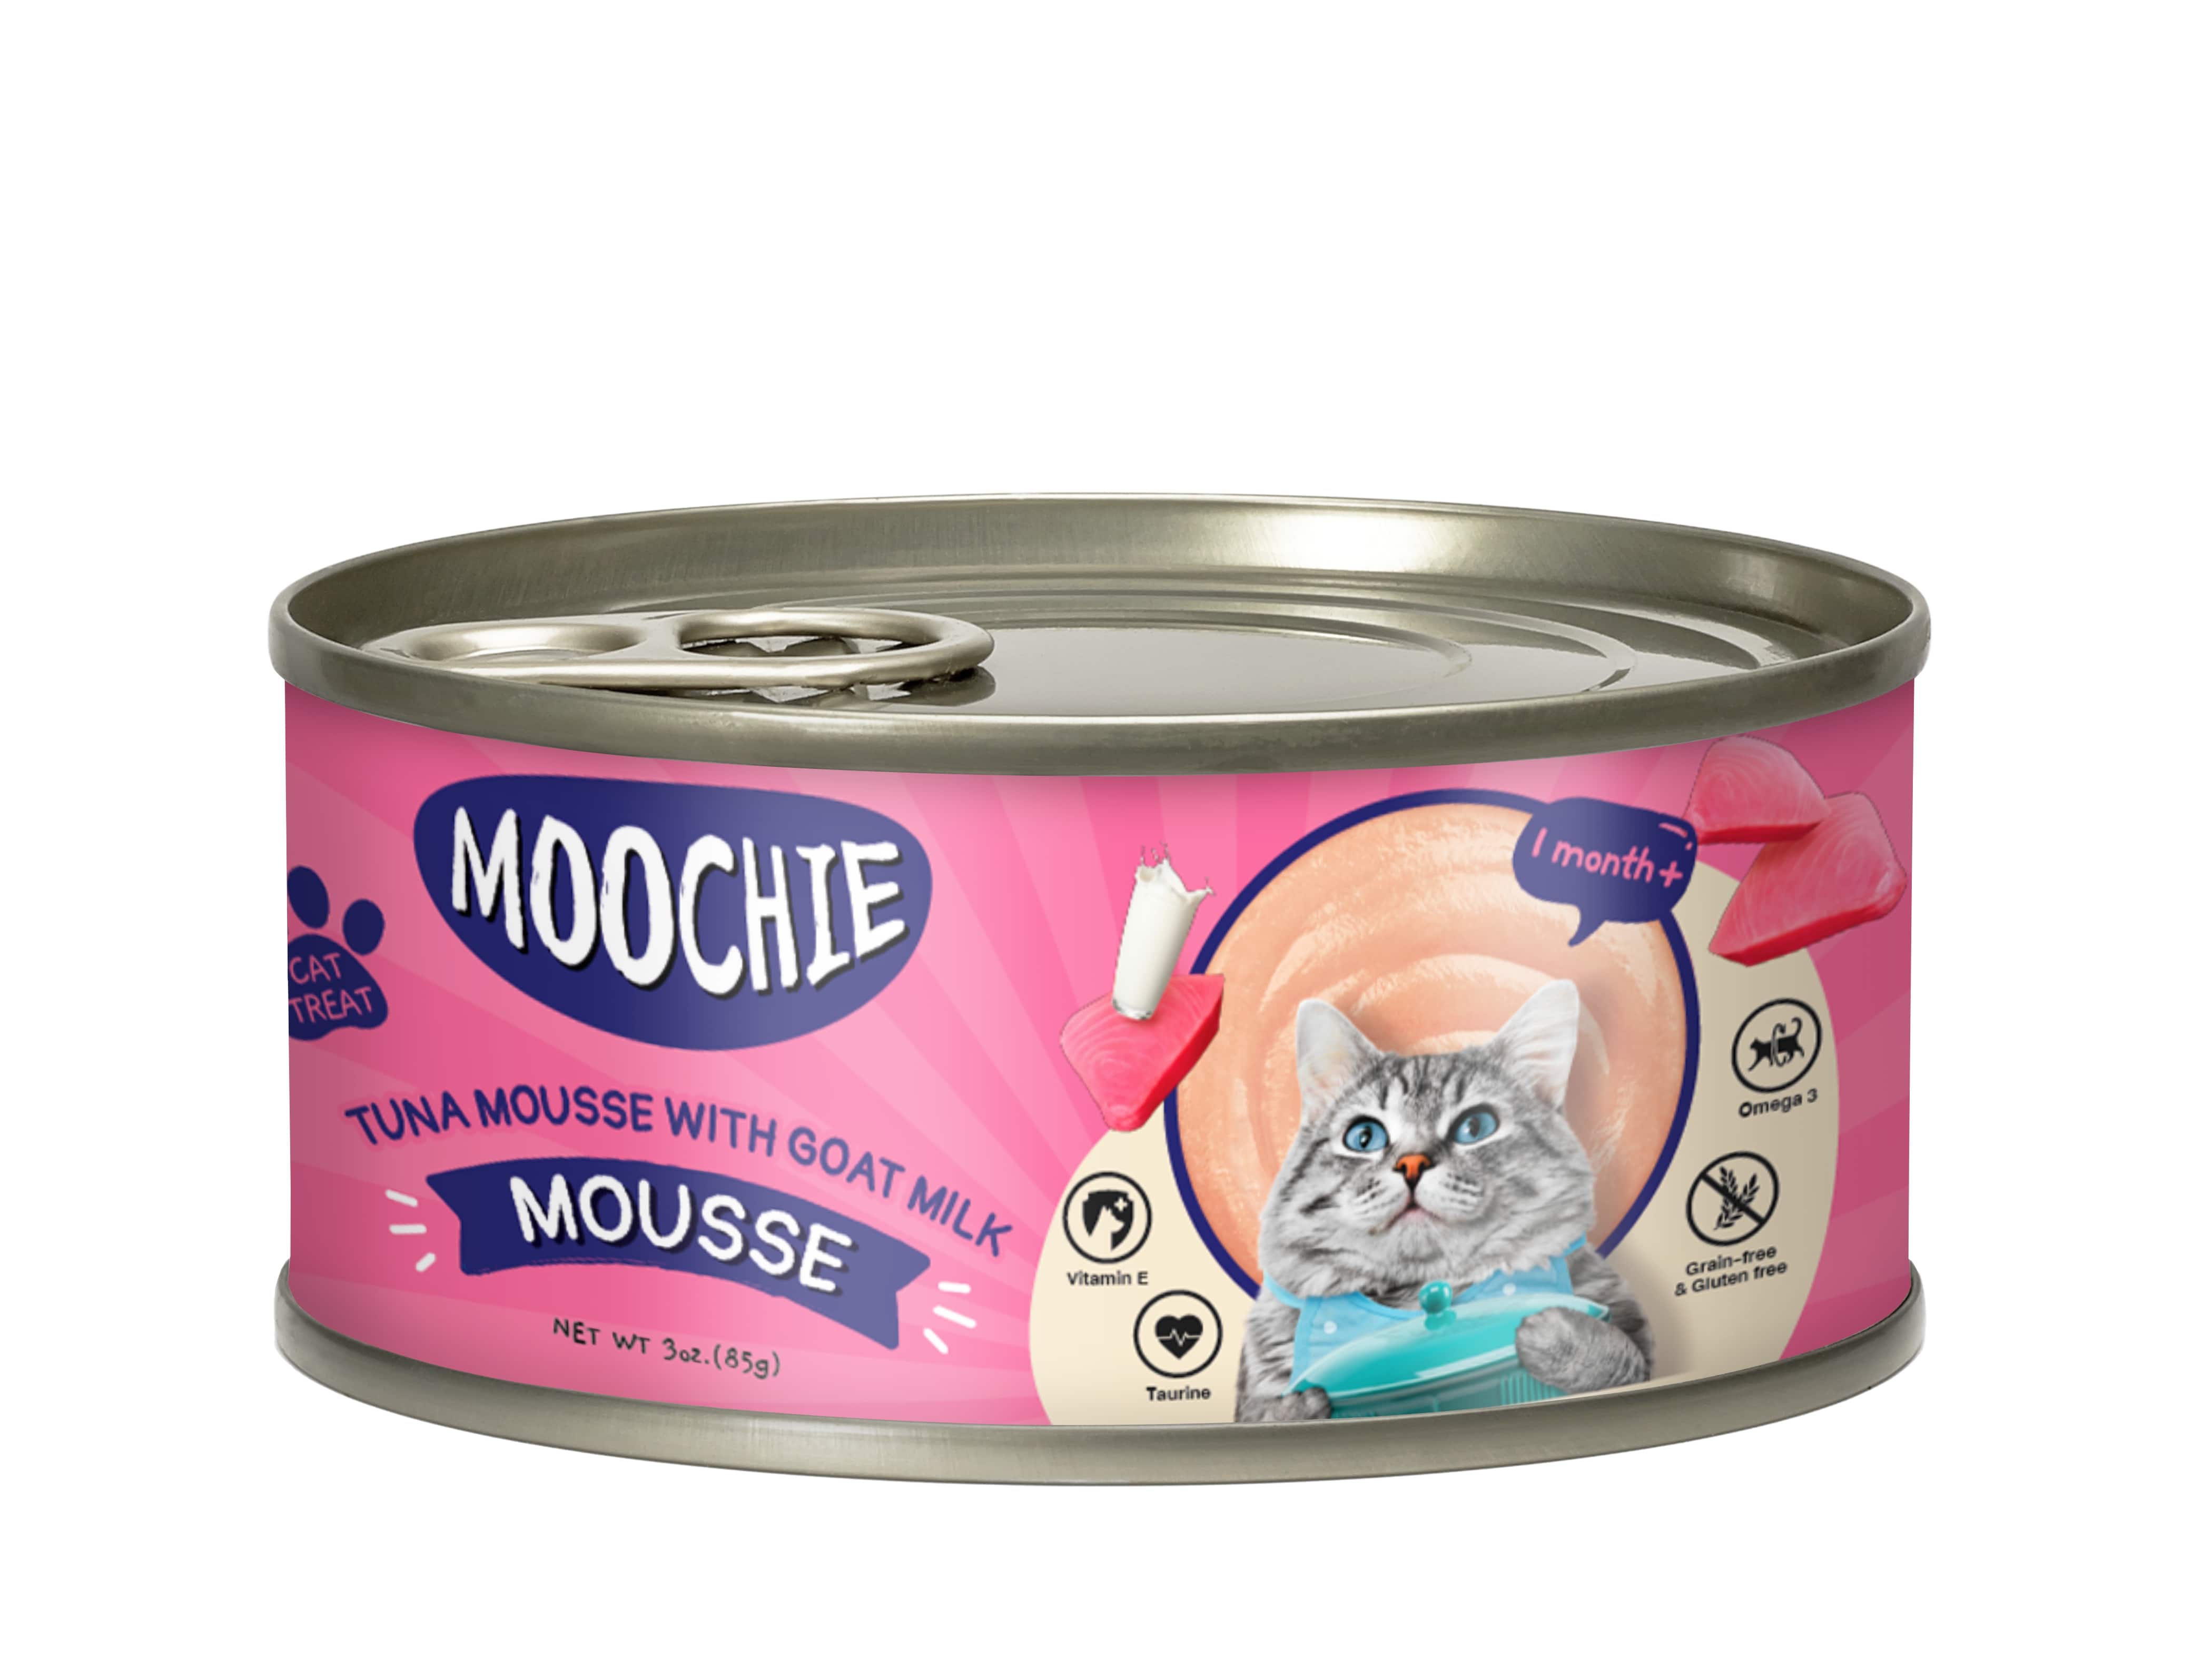 MOOCHIE TUNA MOUSSE WITH GOATMILK 85g Can